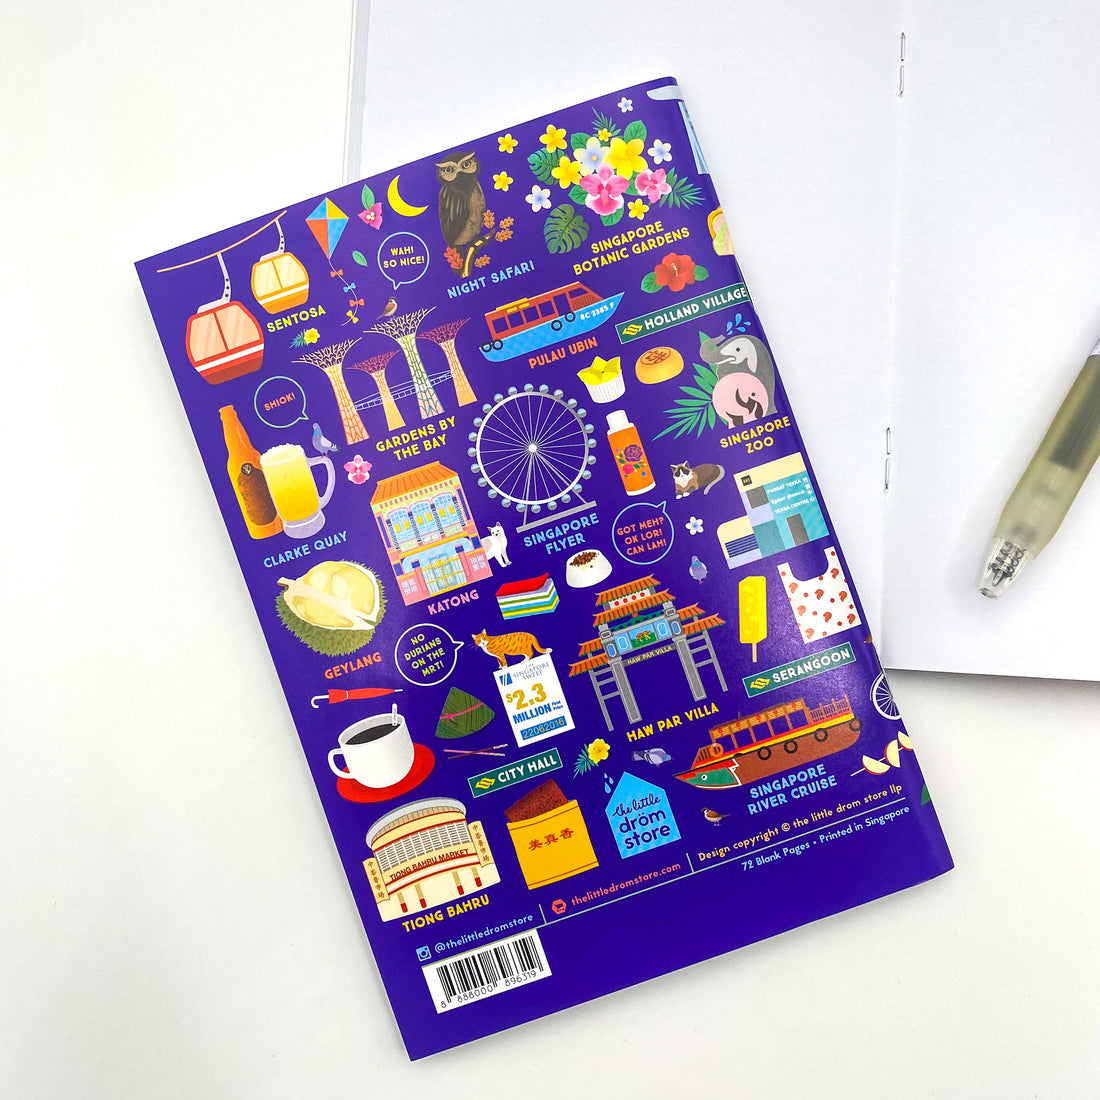 Let's Jalan in Singapore Notebook - Navy Blue